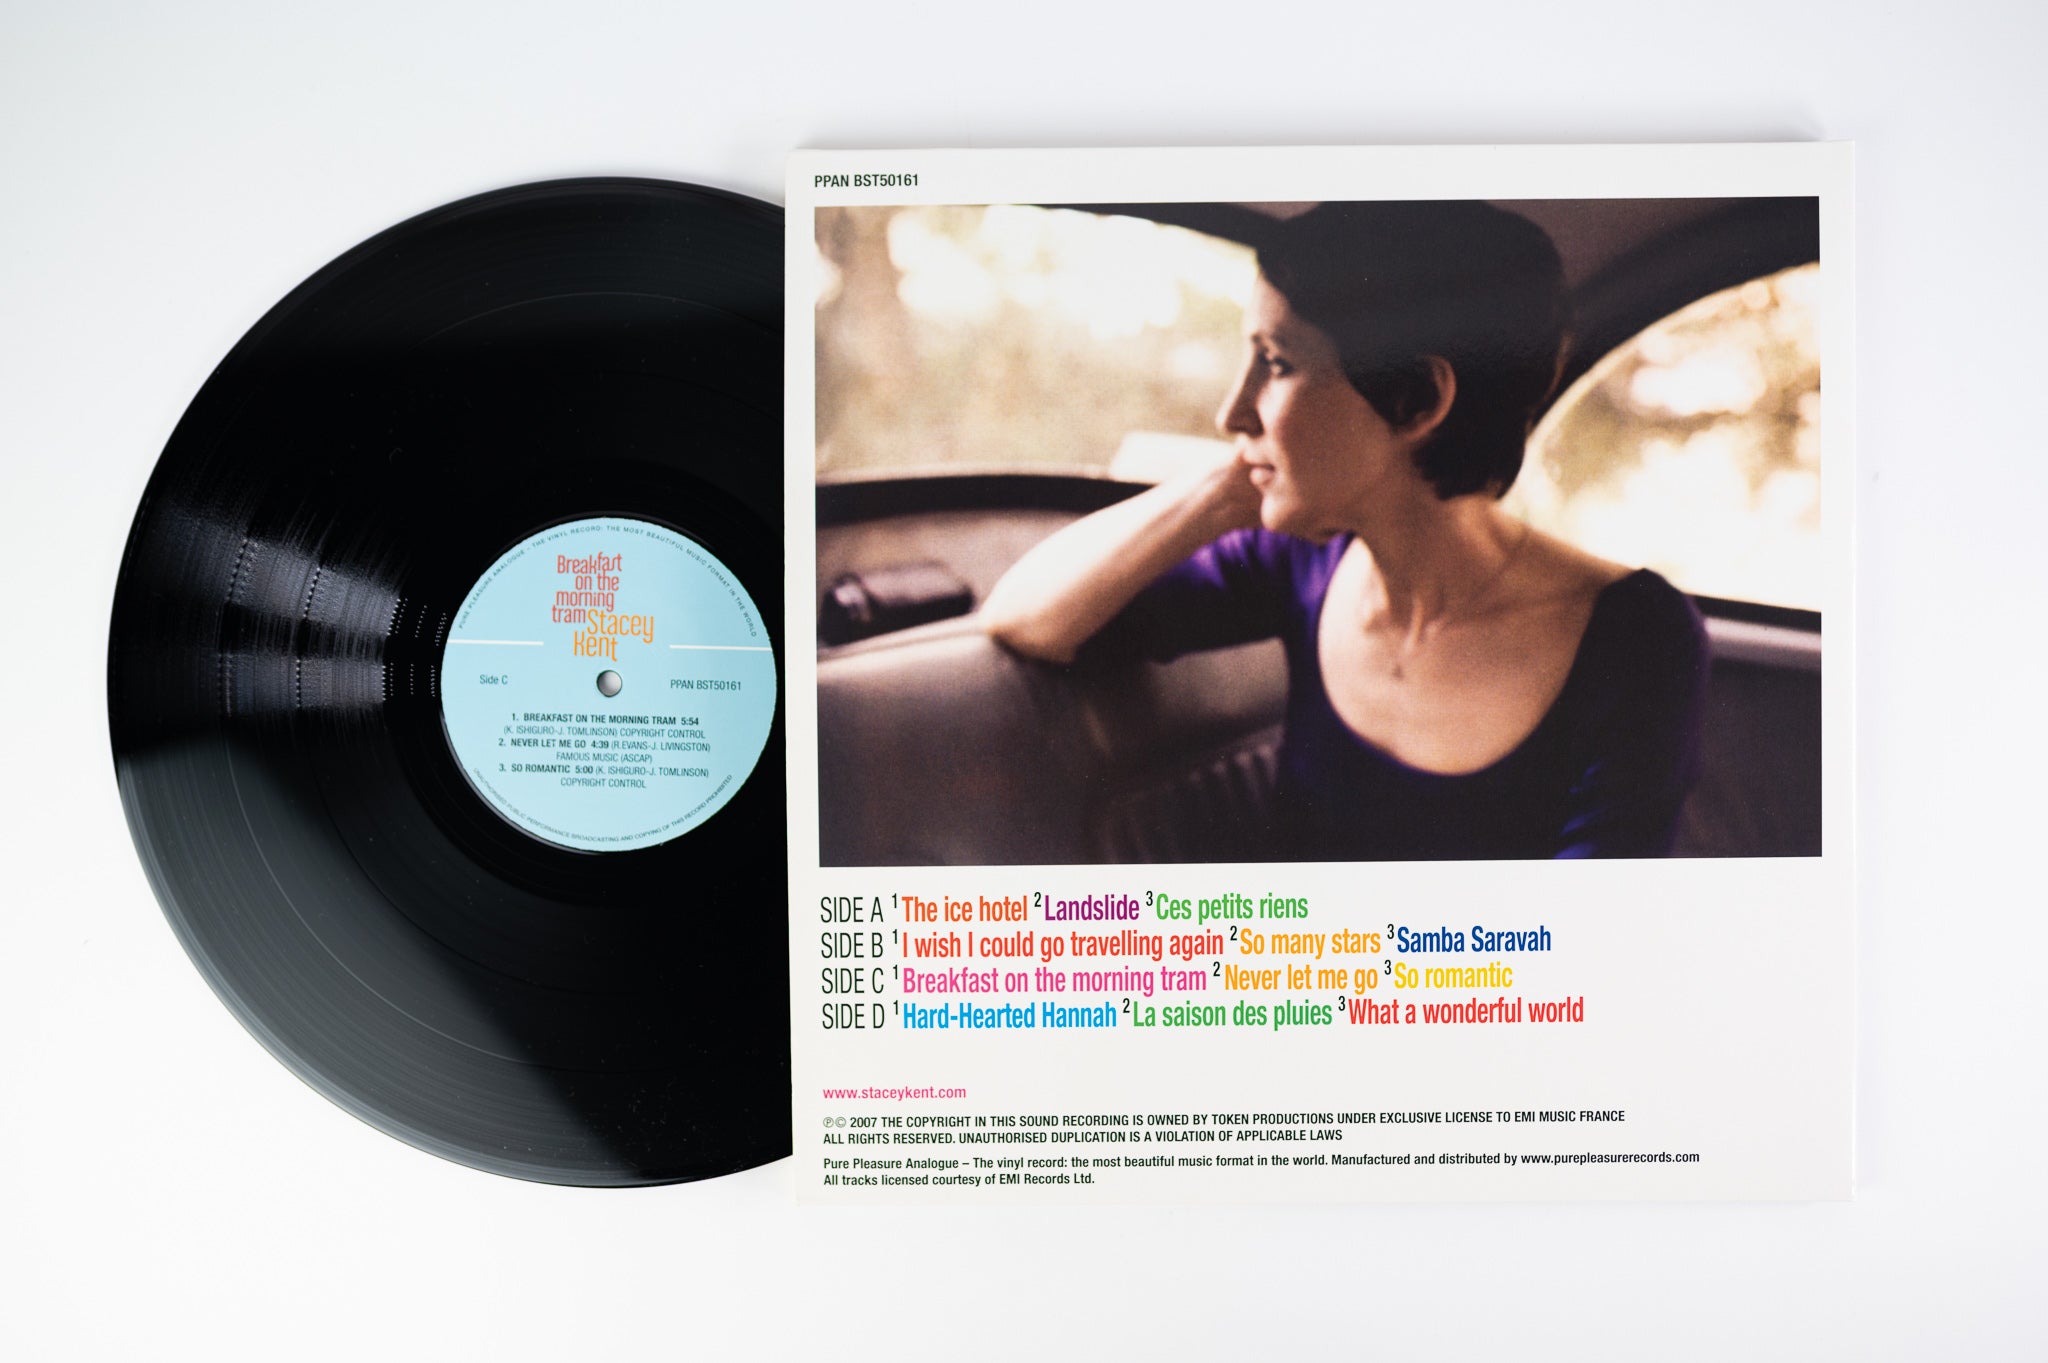 Stacey Kent - Breakfast On The Morning Tram on Pure Pleasure Analogue 180 Gram Reissue